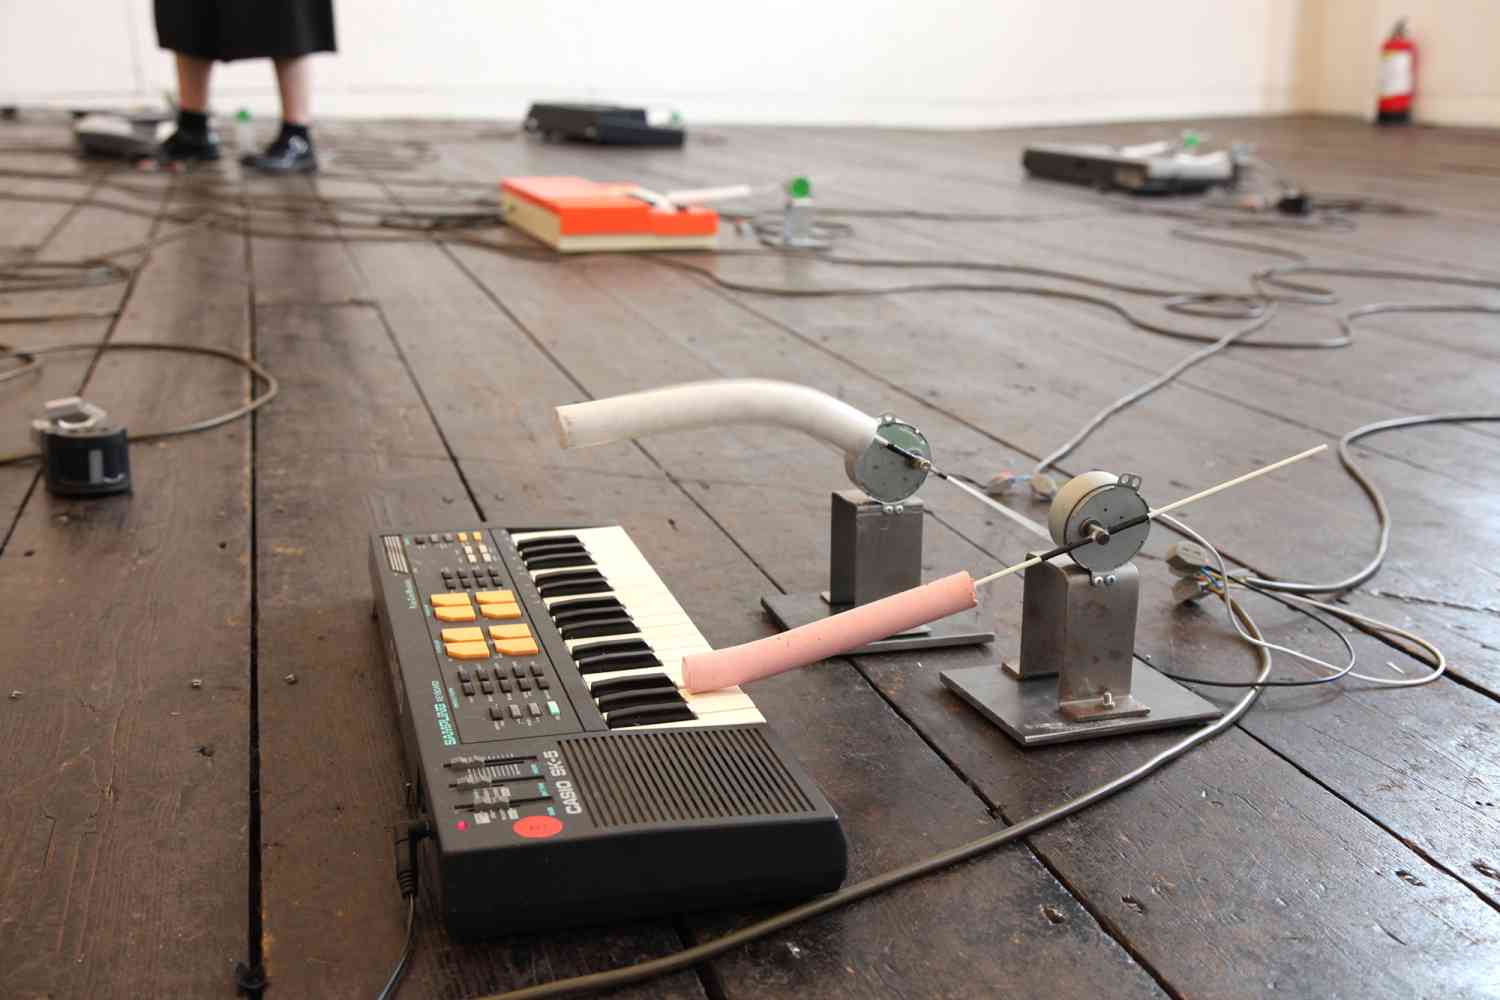 The Origin of Life (detail) - Kinetic sound installation, Beaconsfield Gallery 2019